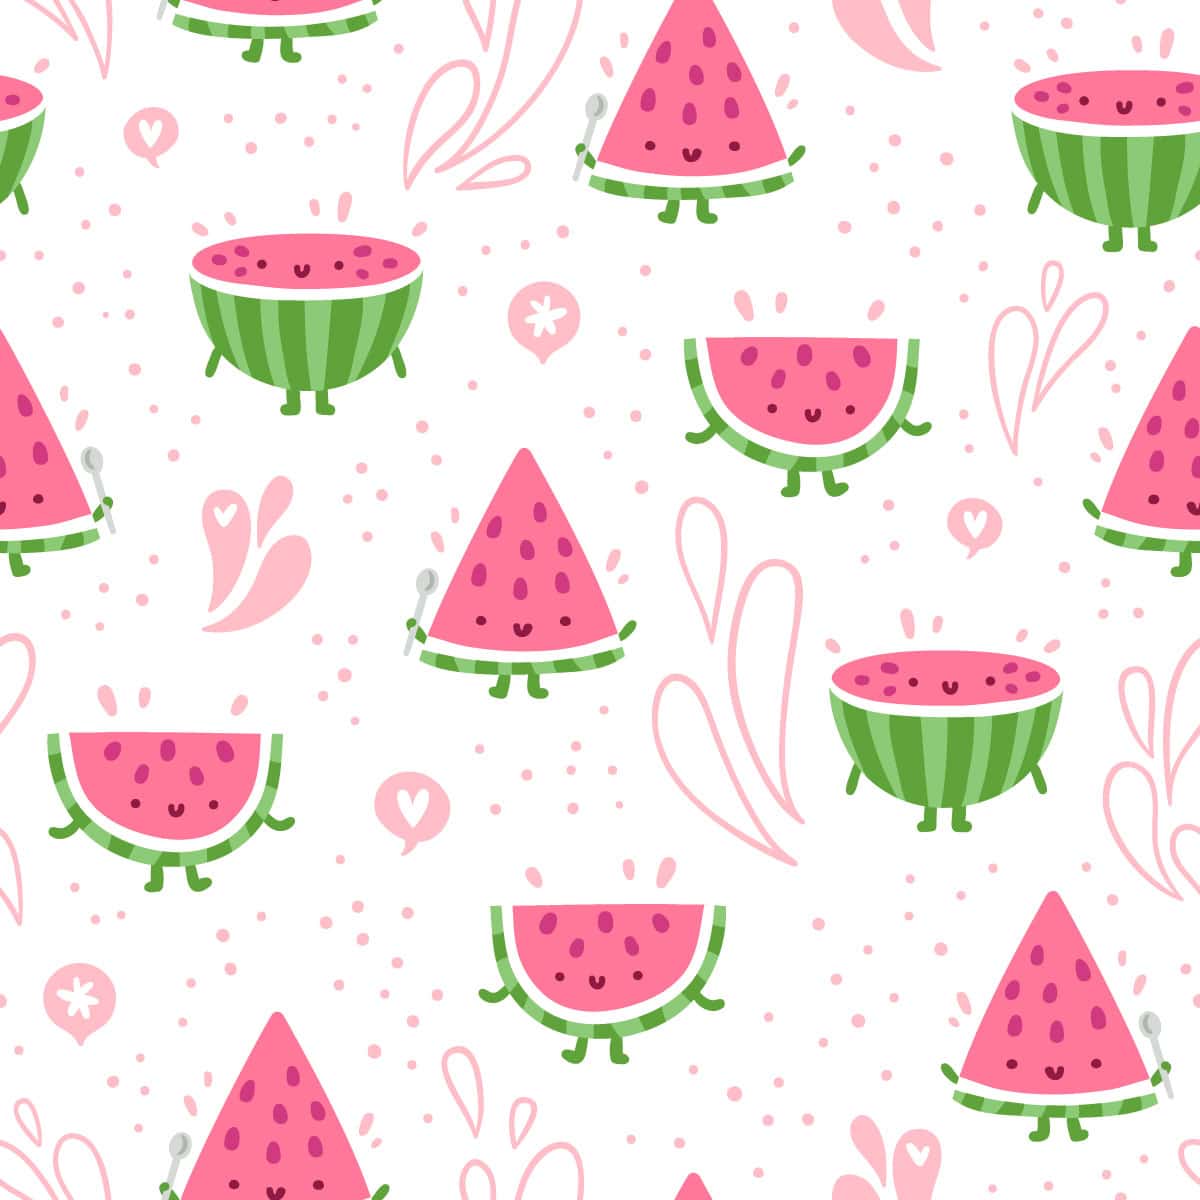 Kids Cute Cartoon Smiling Watermelon Slices Wallpaper Pattern - Wall to  Wall Graphics